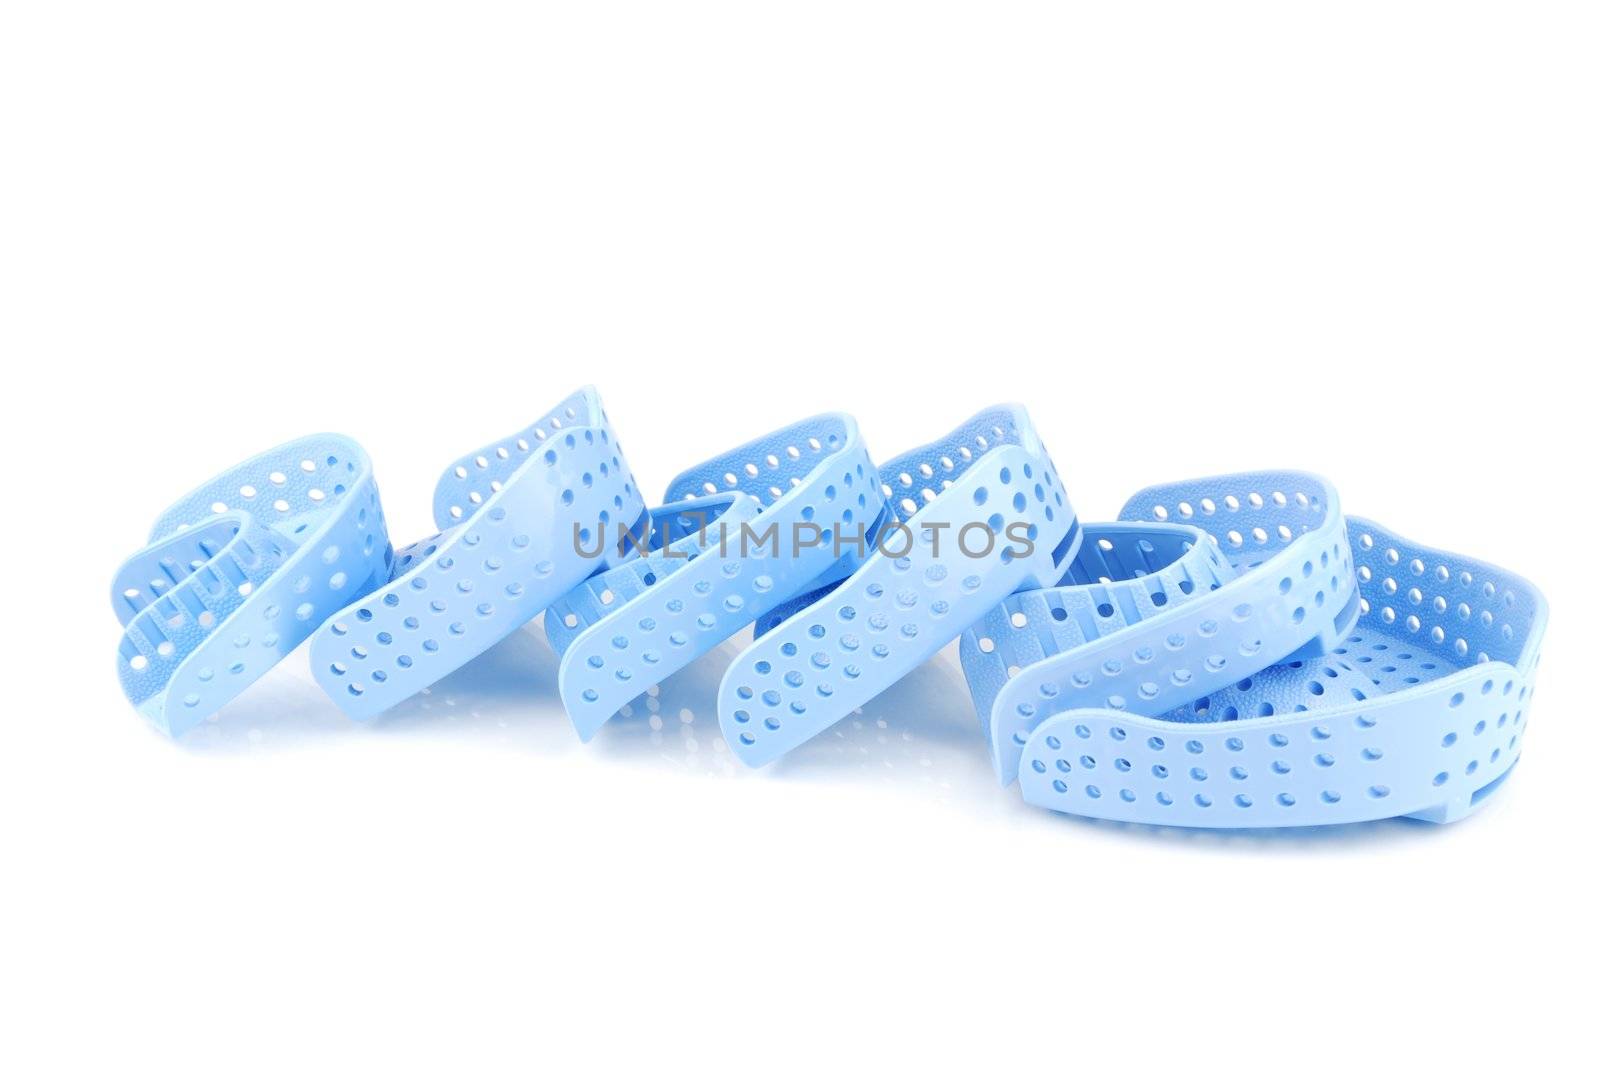 different sizes of acrylic trays for teeth impressions